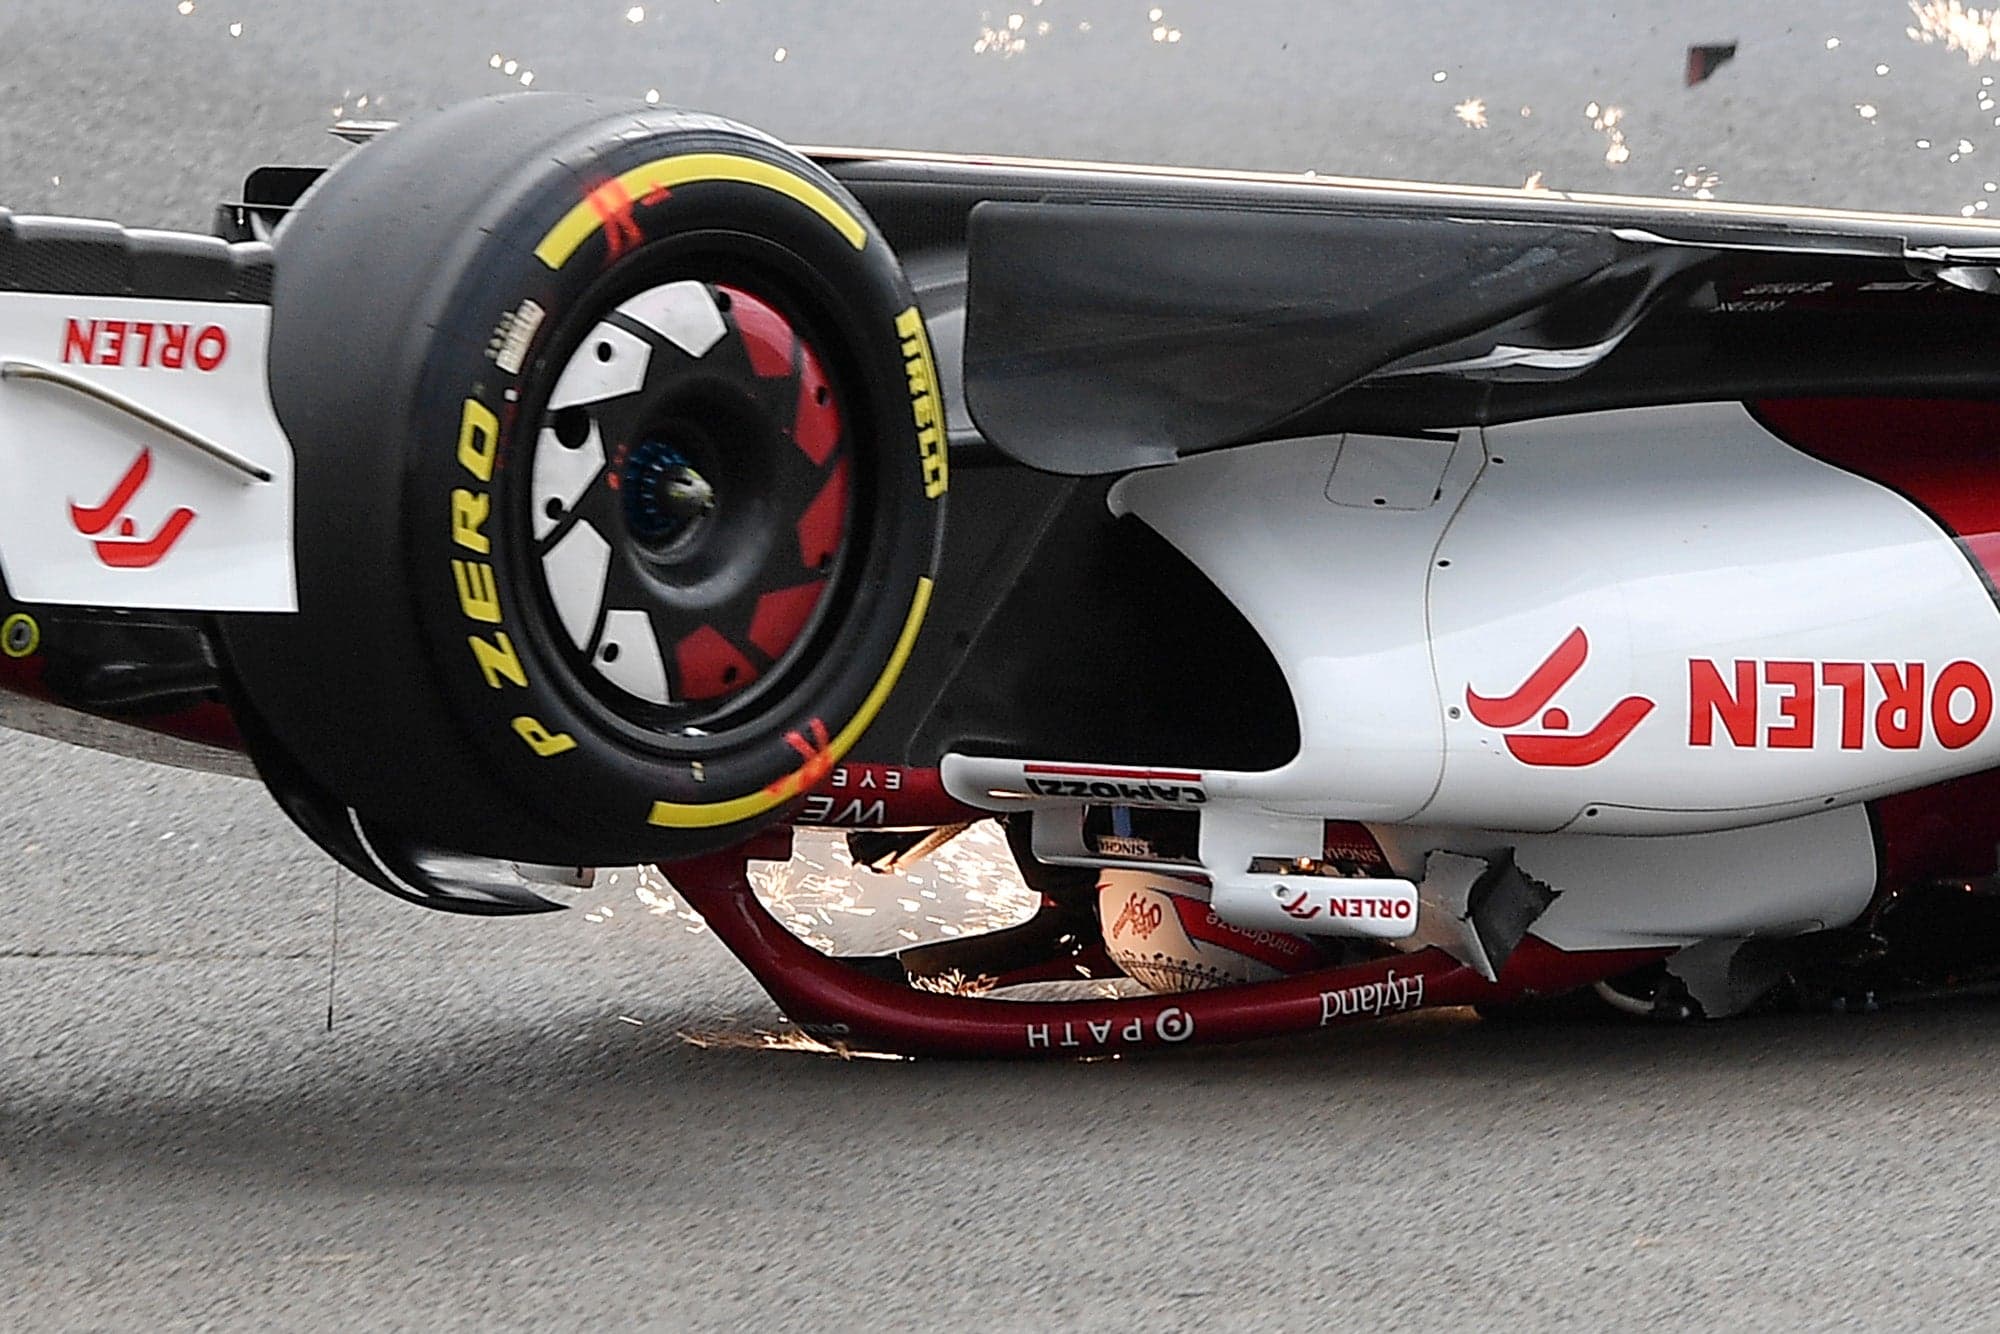 Zhou Guanyu's car sliding across the tarmac on the halo alone, the rear of the monocoque having collapsed